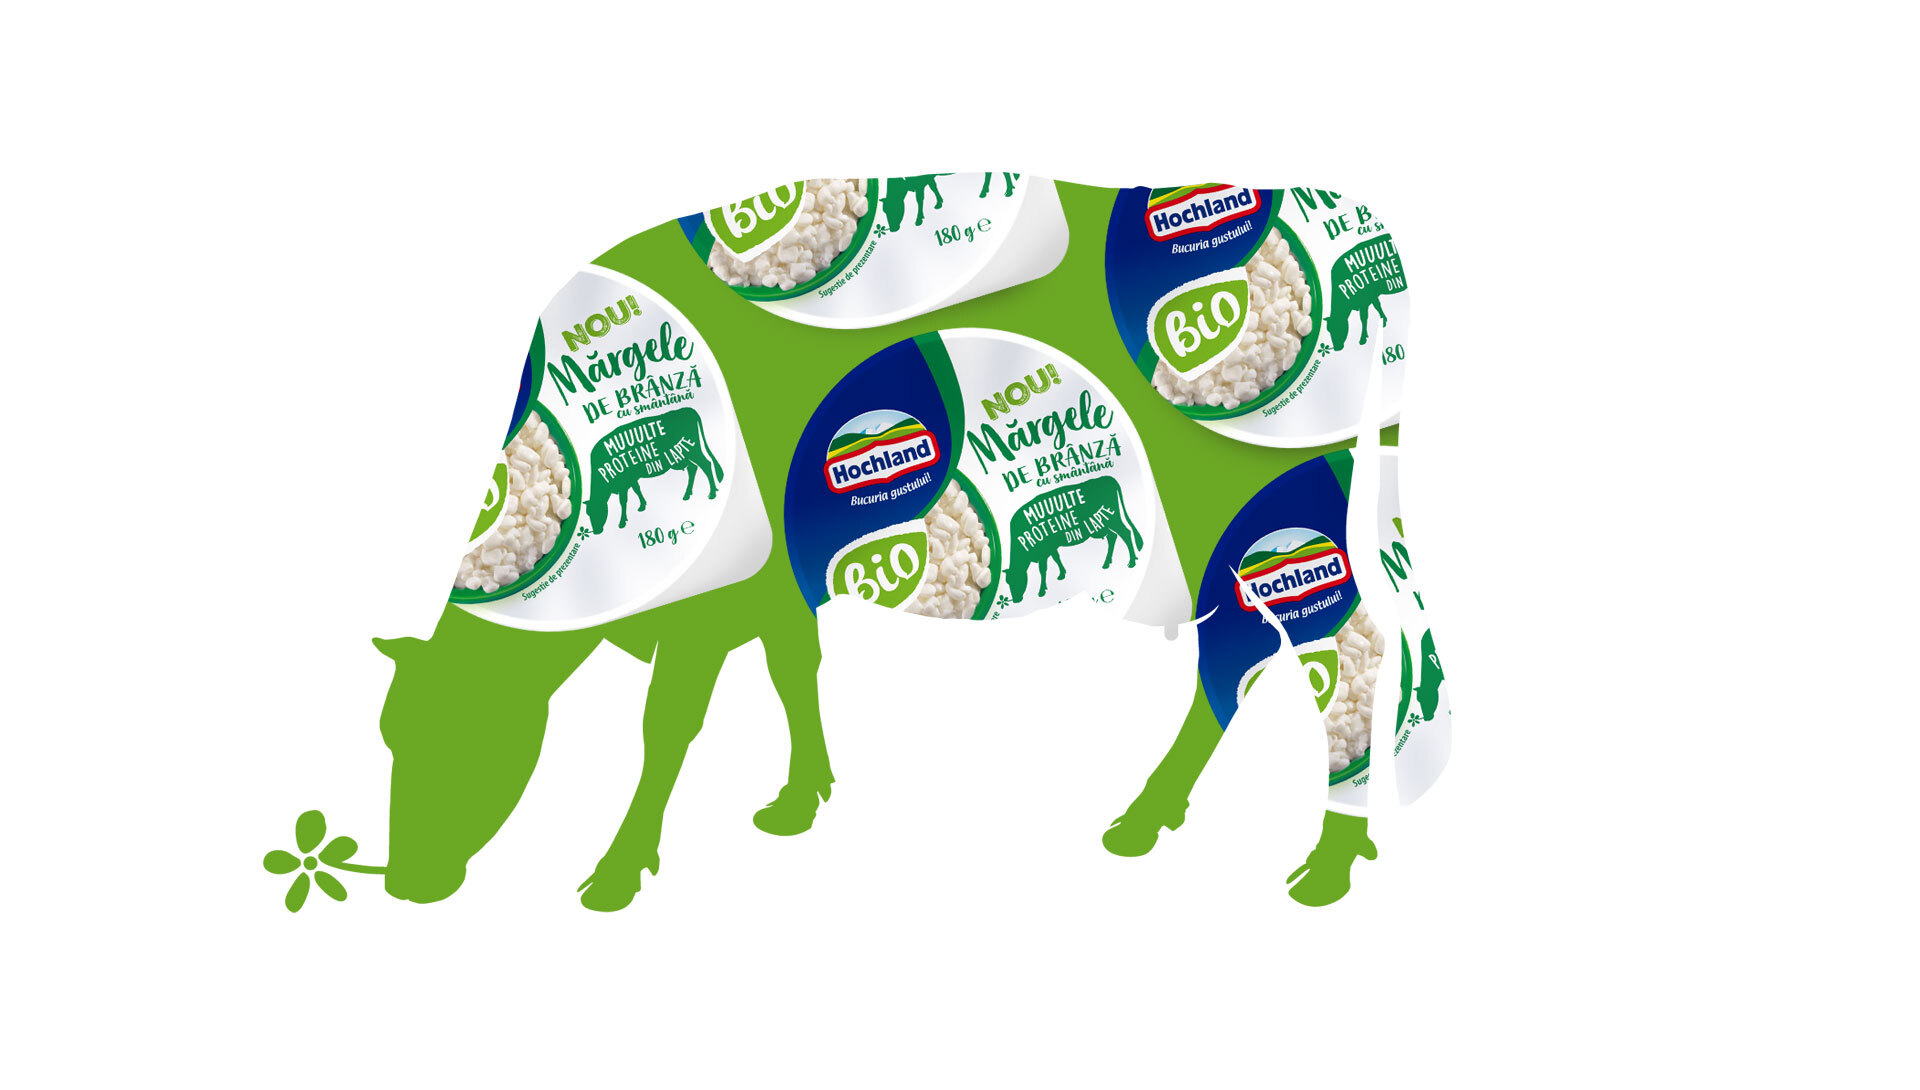 Cottage cheese packaging design for Hochland Margele de Branza line and the cow illustration.